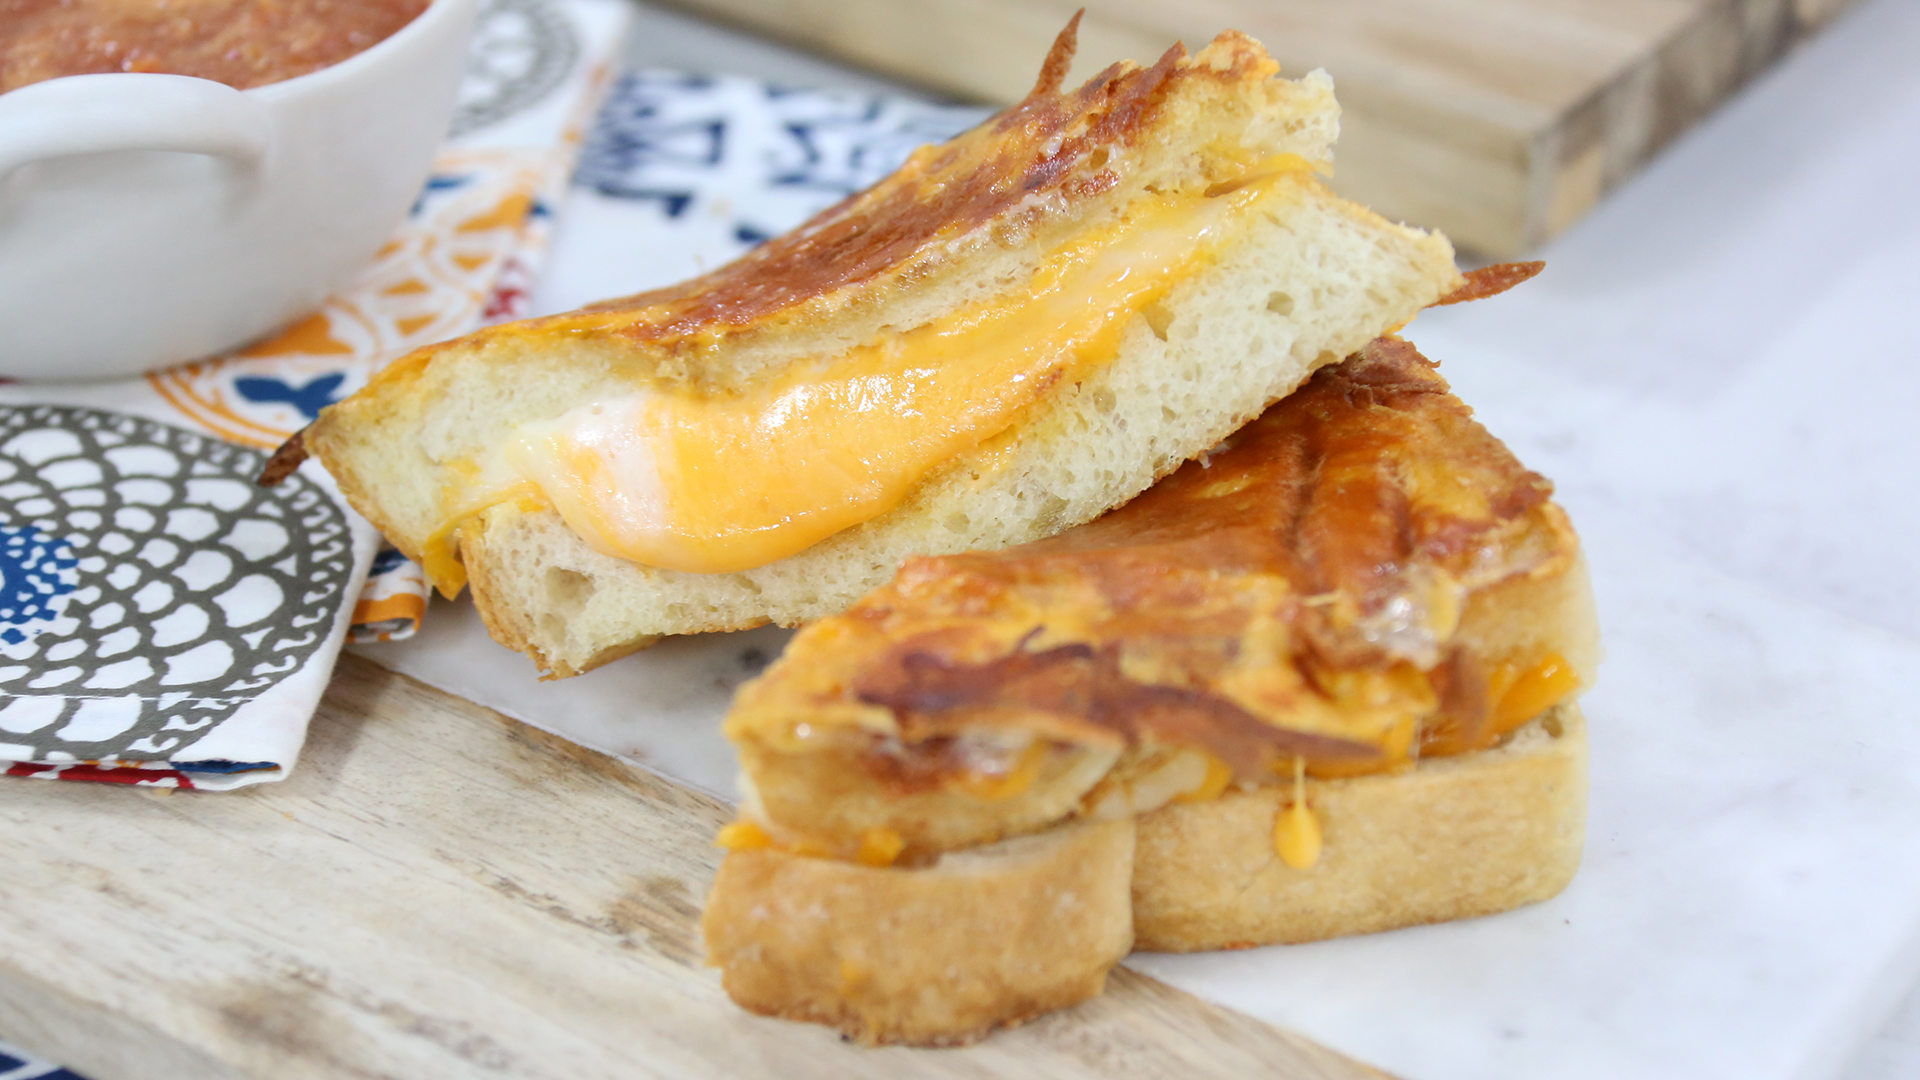 Super crispy and cheesy grilled cheese